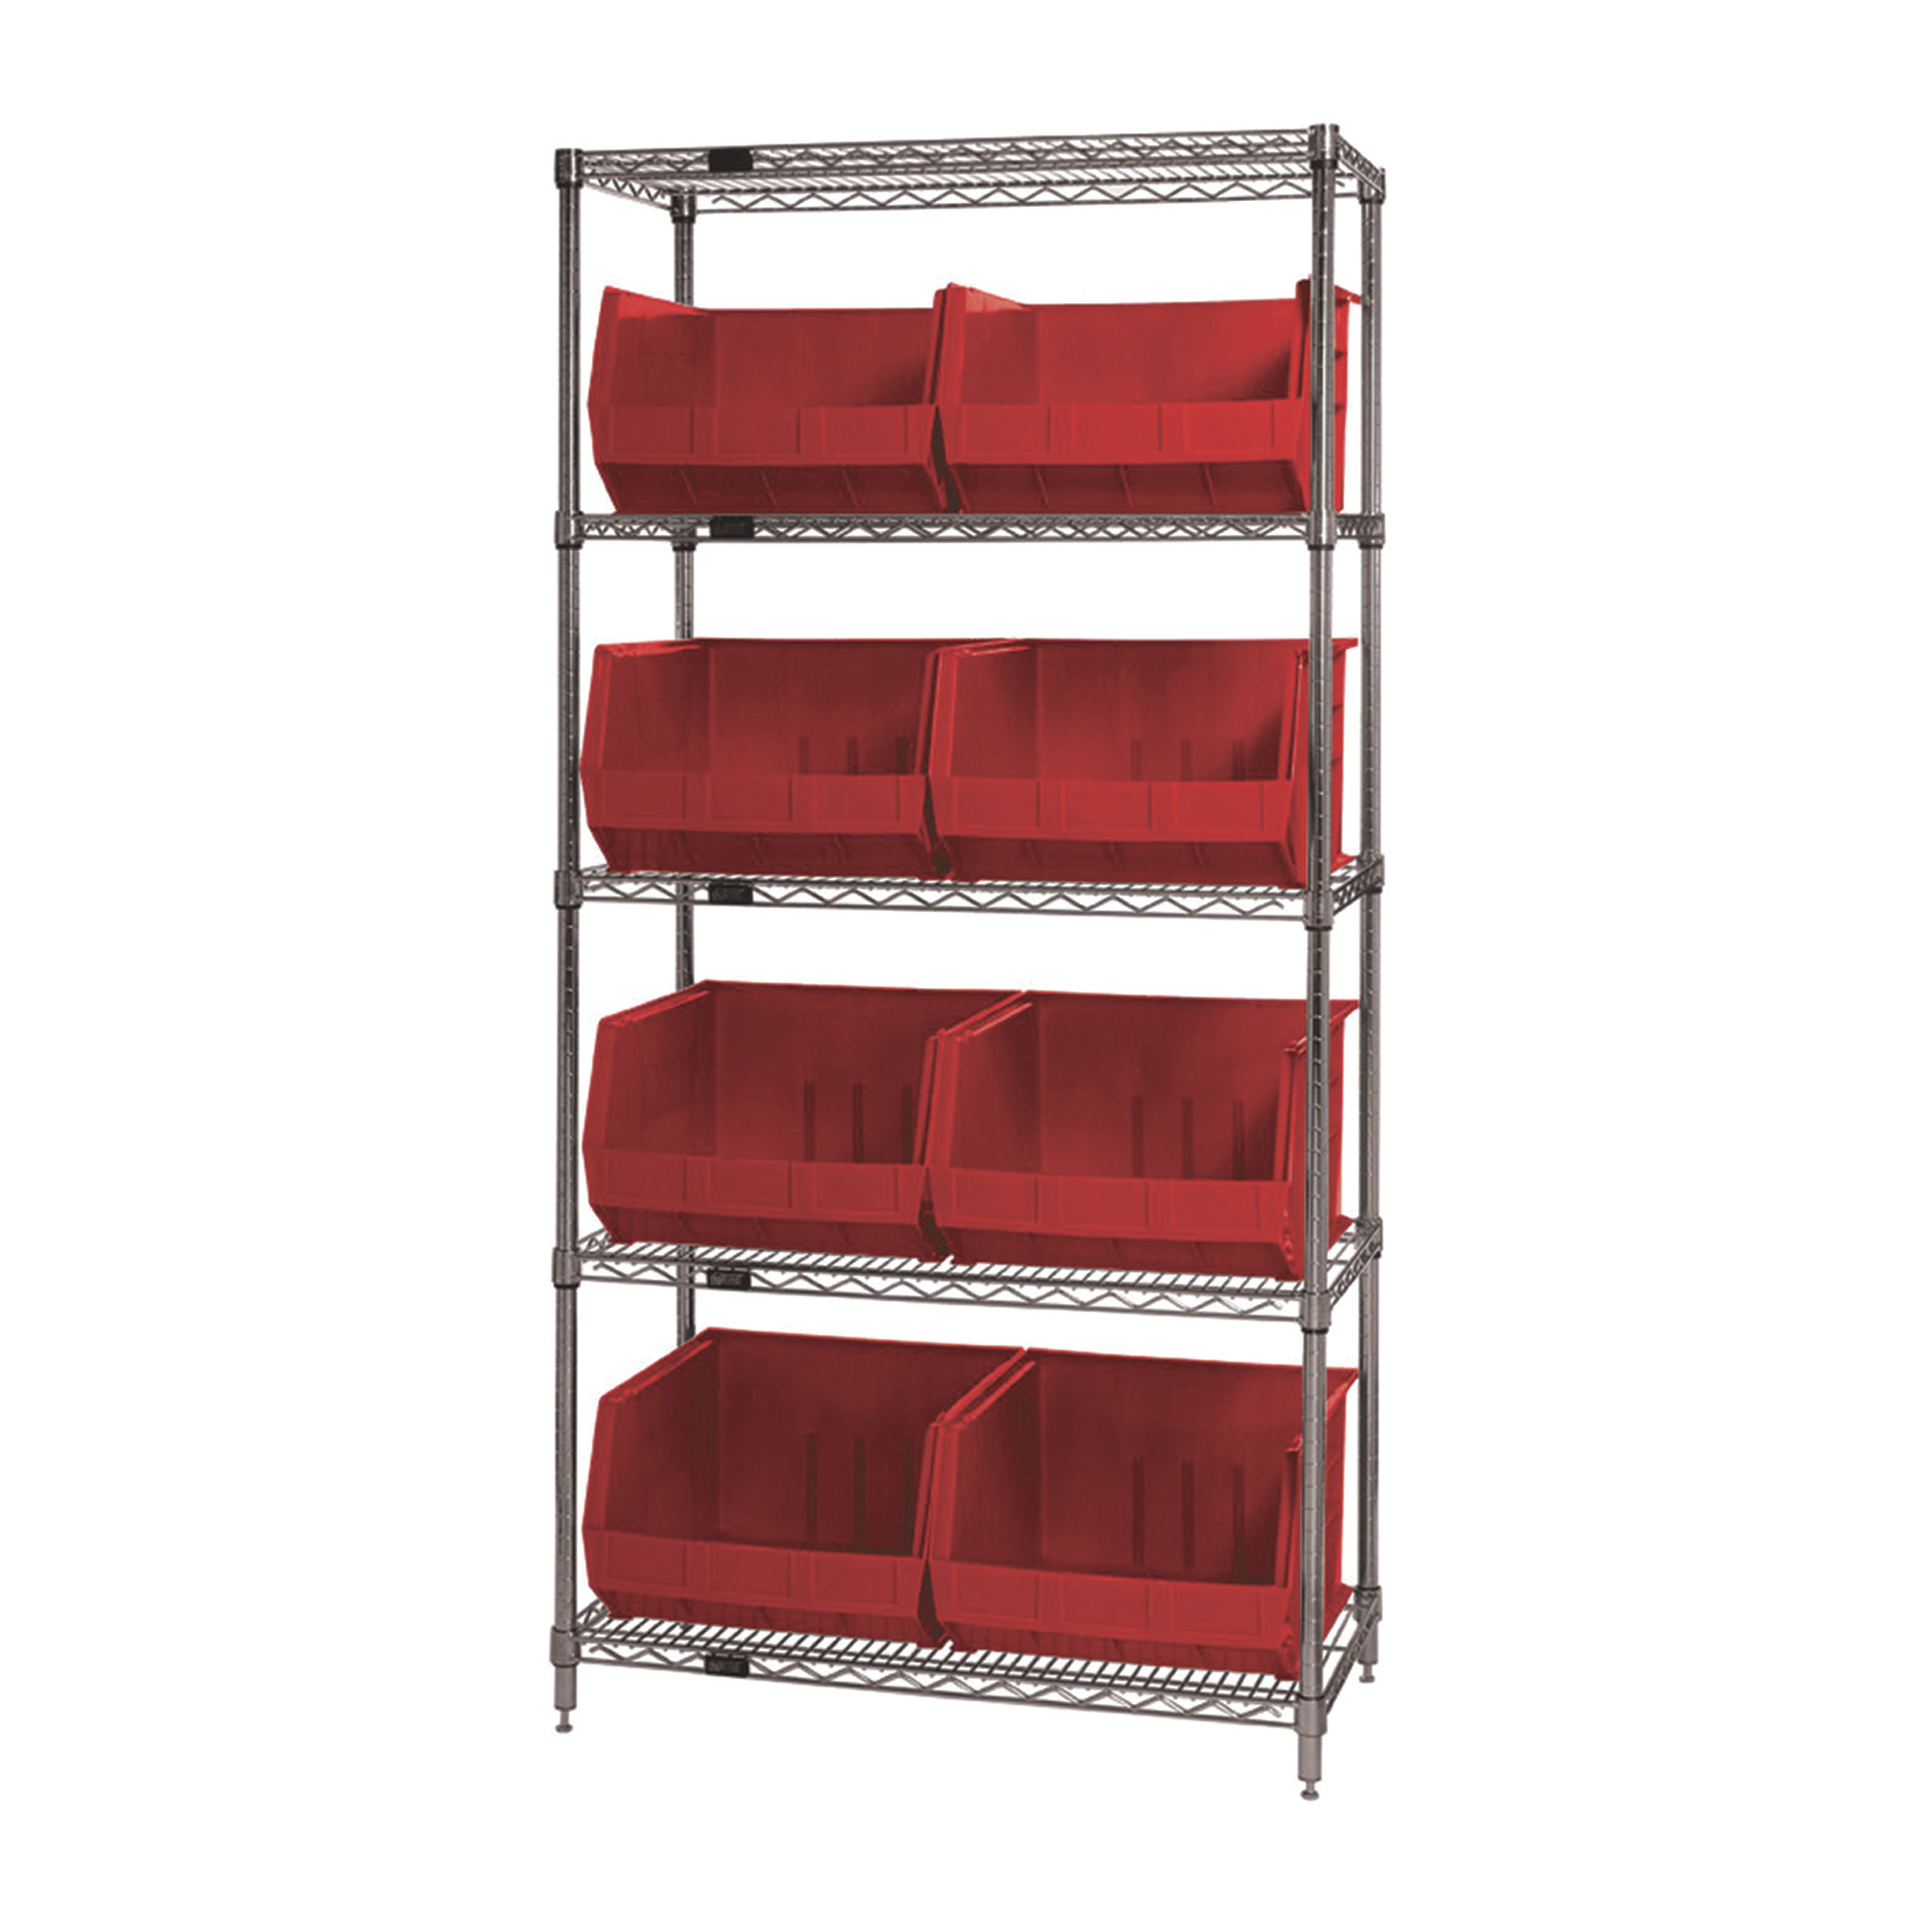 Quantum Storage Single Side Wire Chrome Shelving Unit with 8 Ultra Bins, 18Inch L x 36Inch W x 74Inch H, Red, Model WR5-270RD